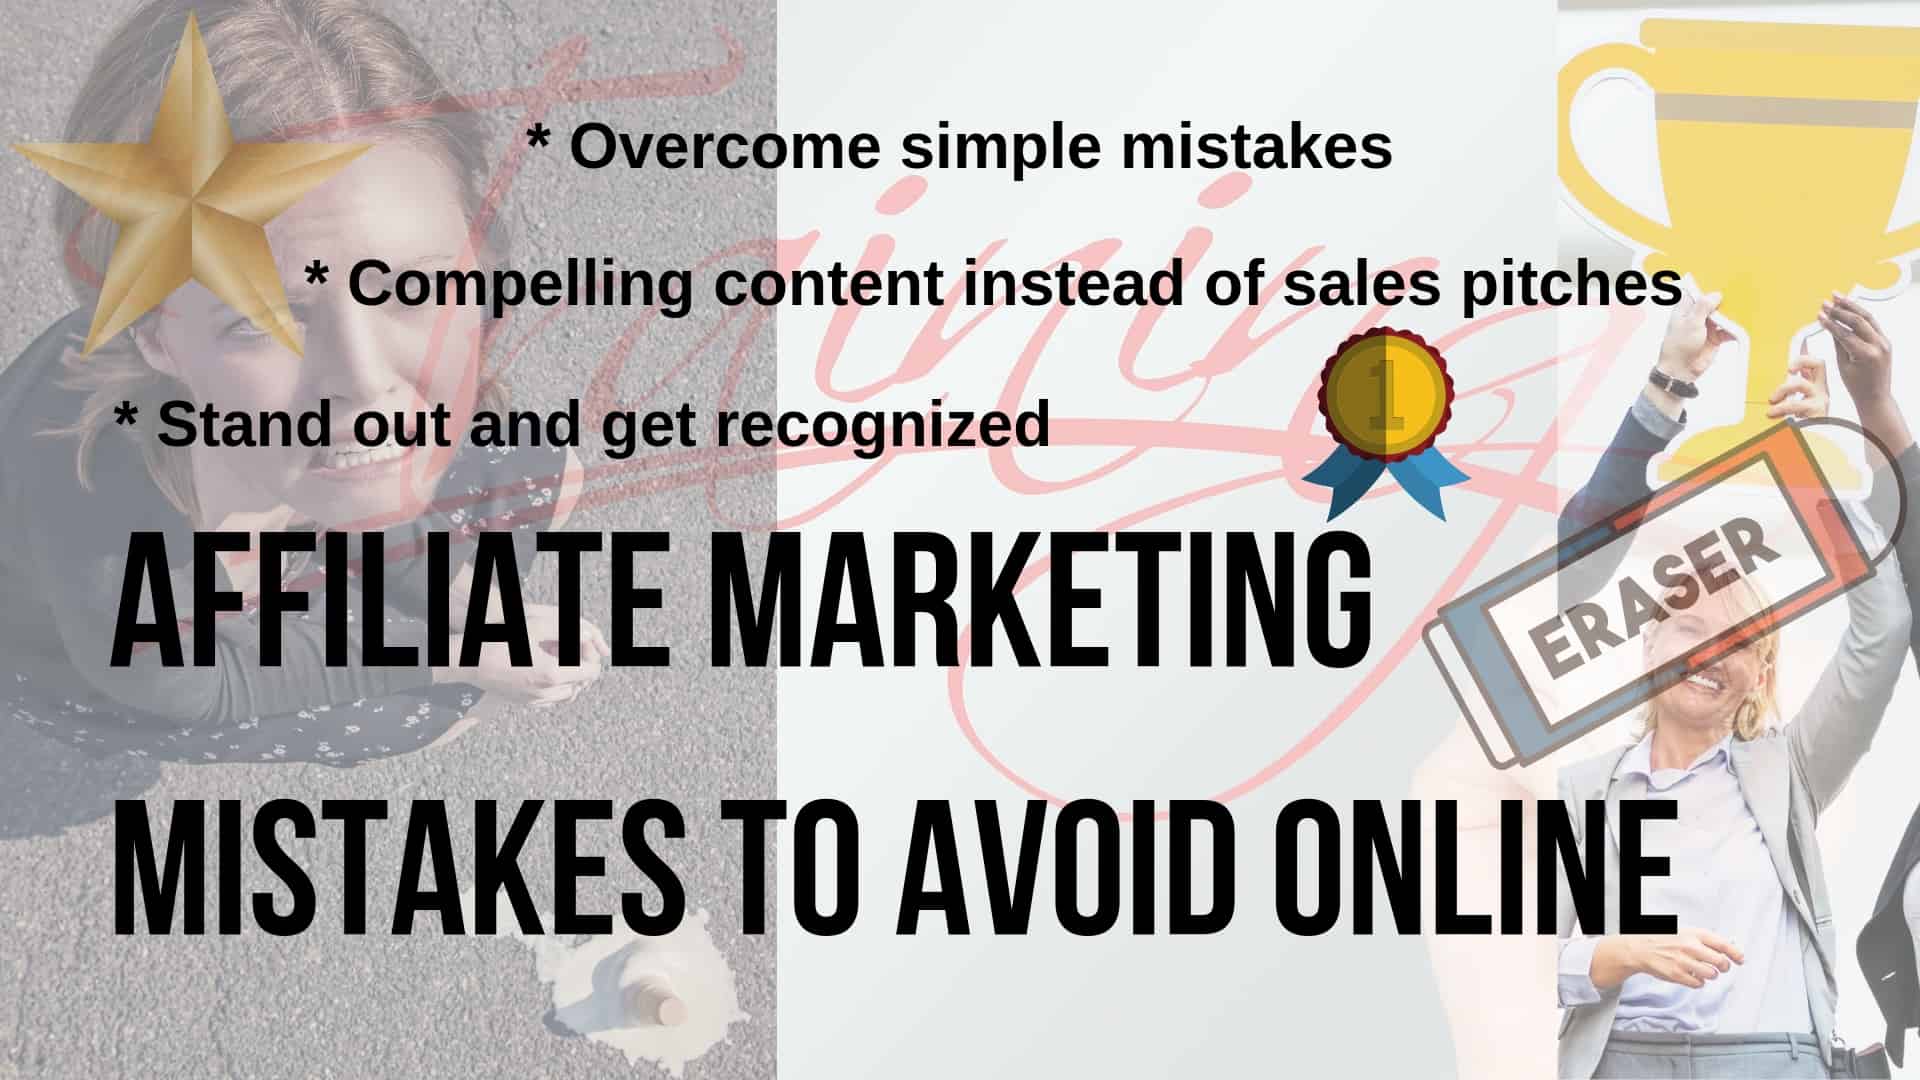 Affiliate marketing mistakes to avoid online